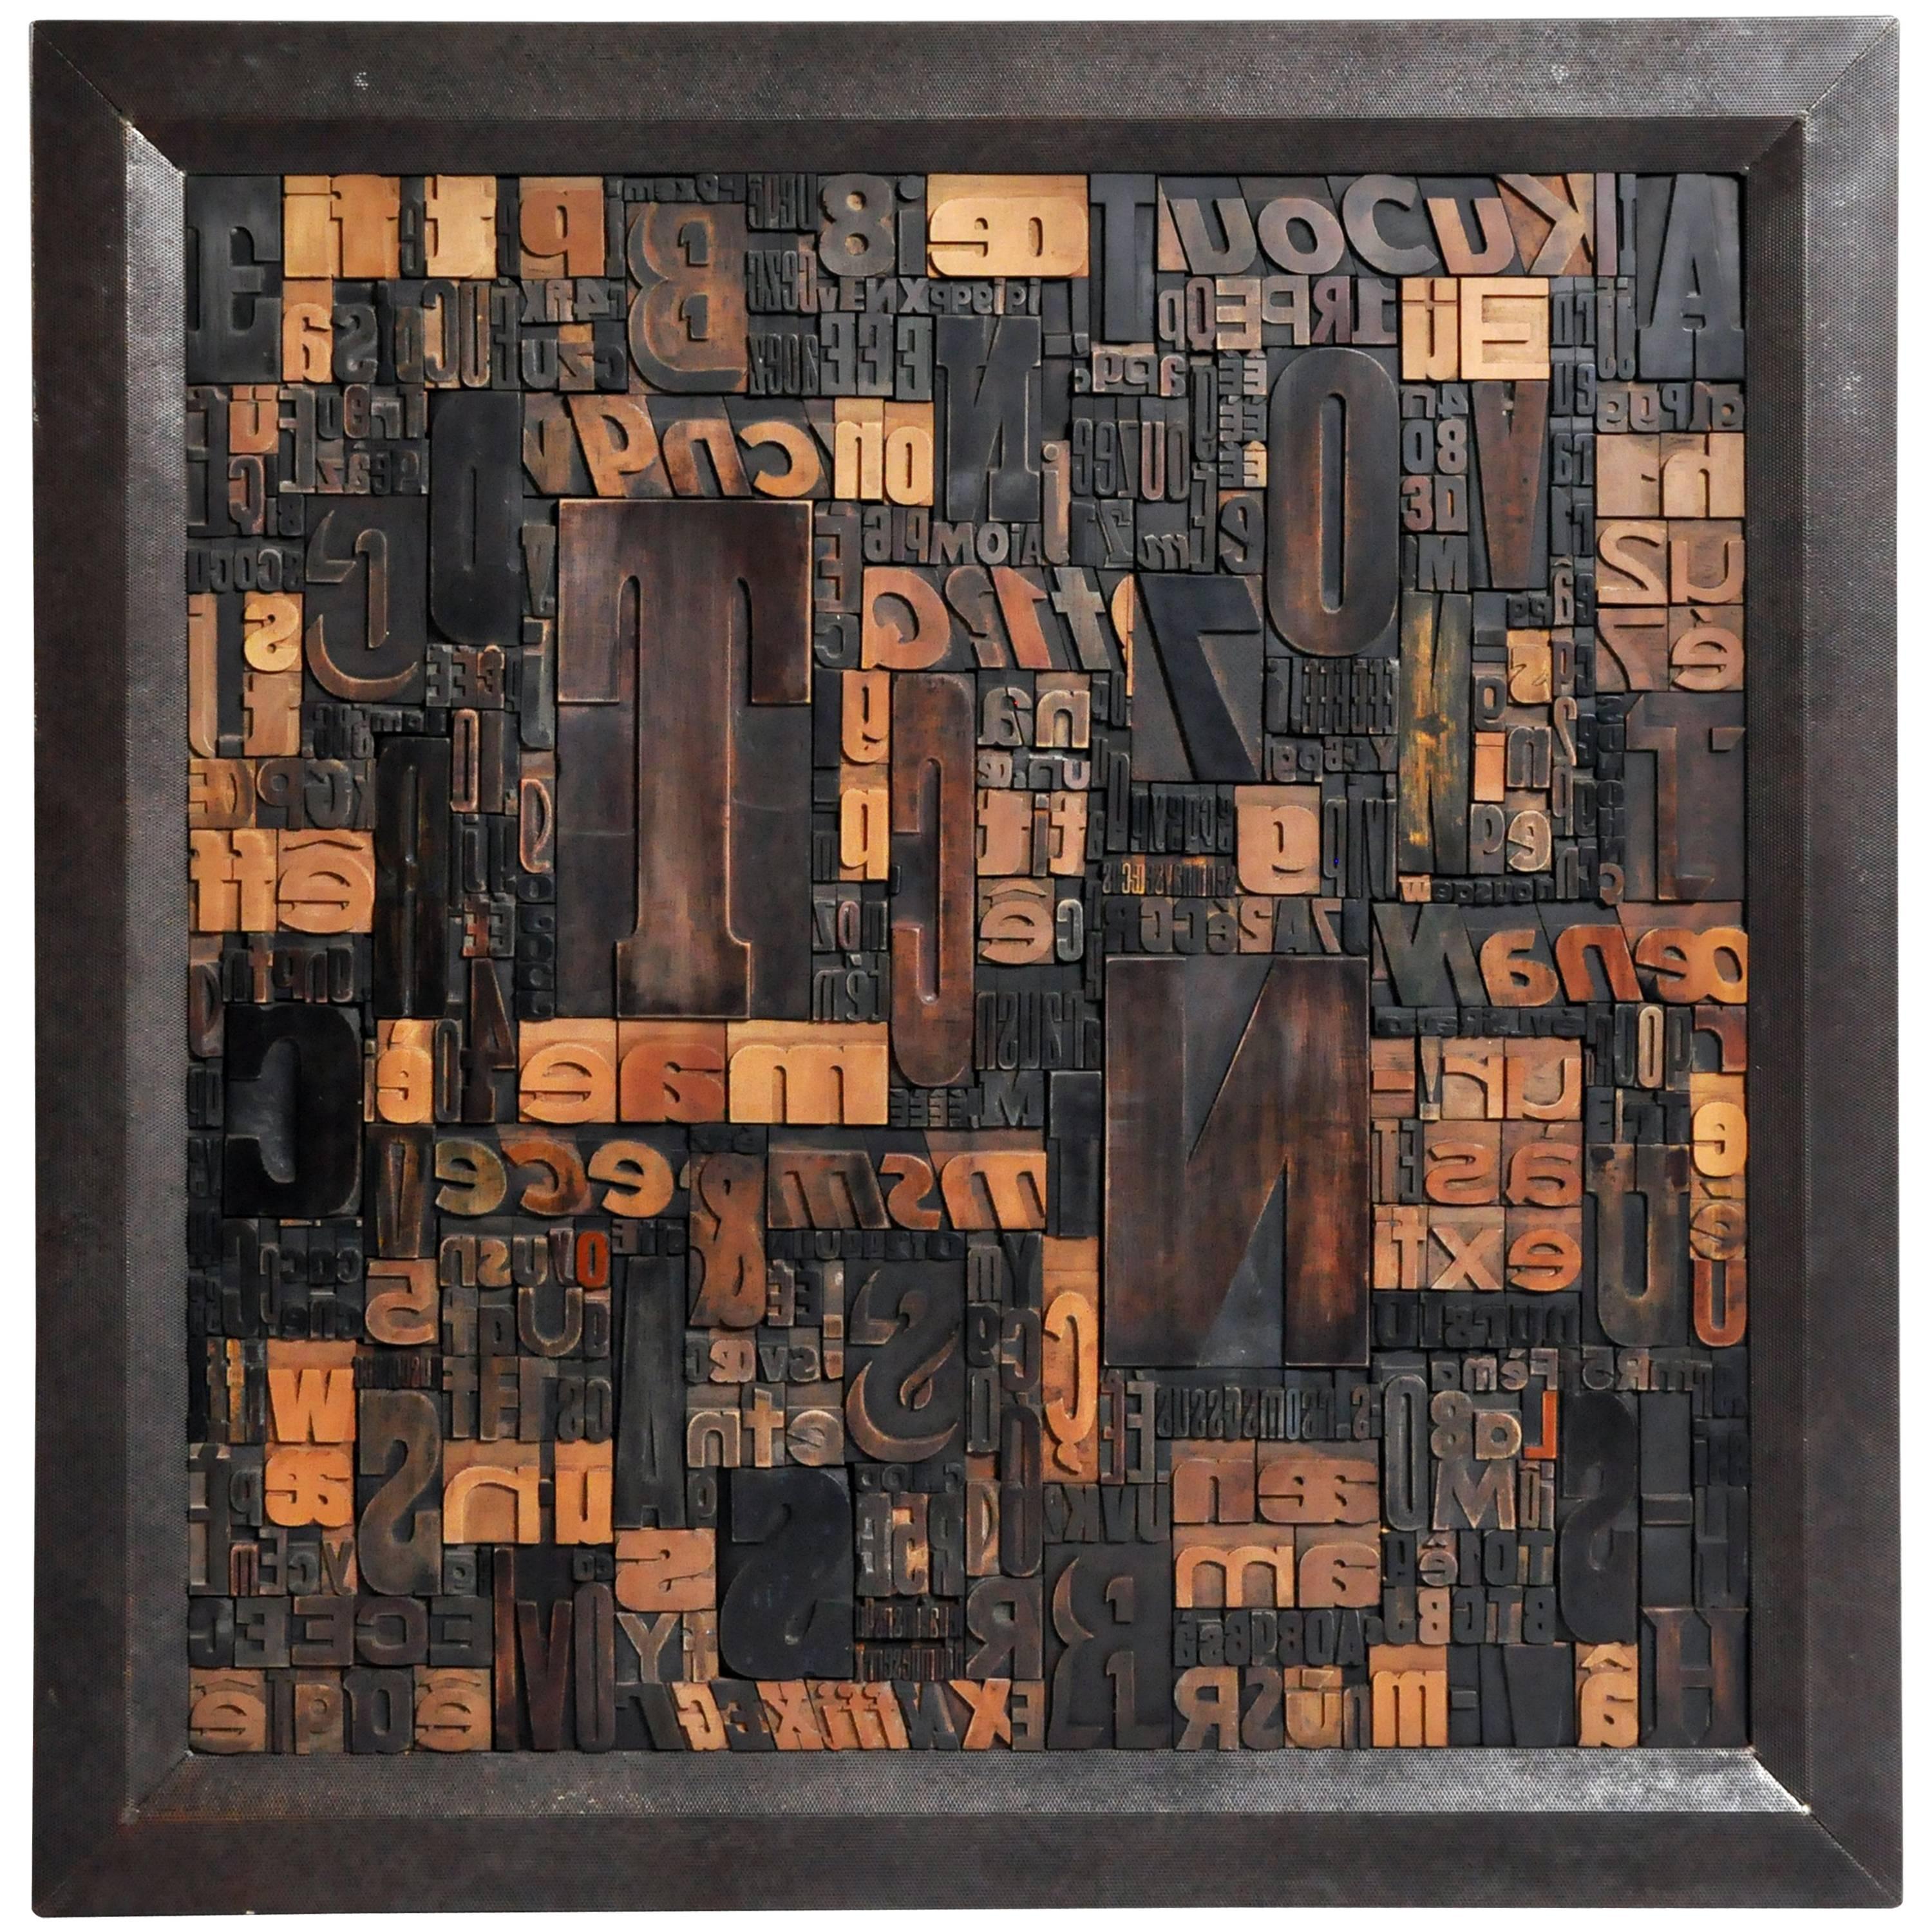 "Les Lettres" Contemporary Art Work by Raoul W. For Sale